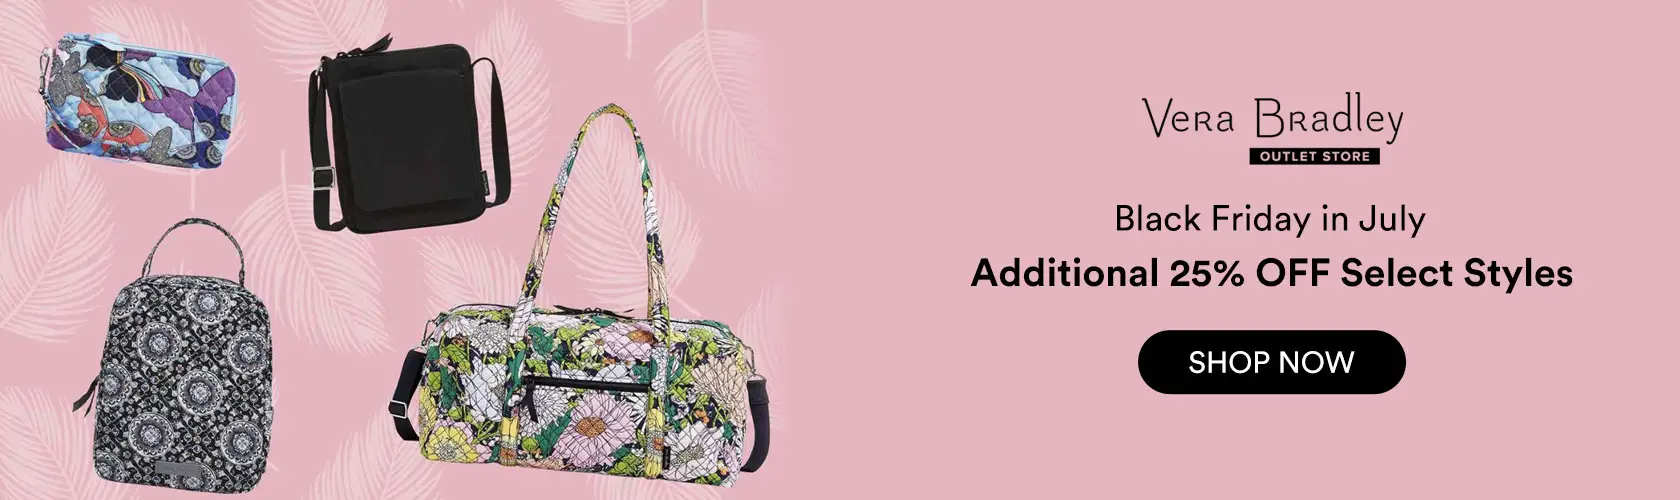 Vera Bradley Outlet: Additional 25% OFF Select Styles